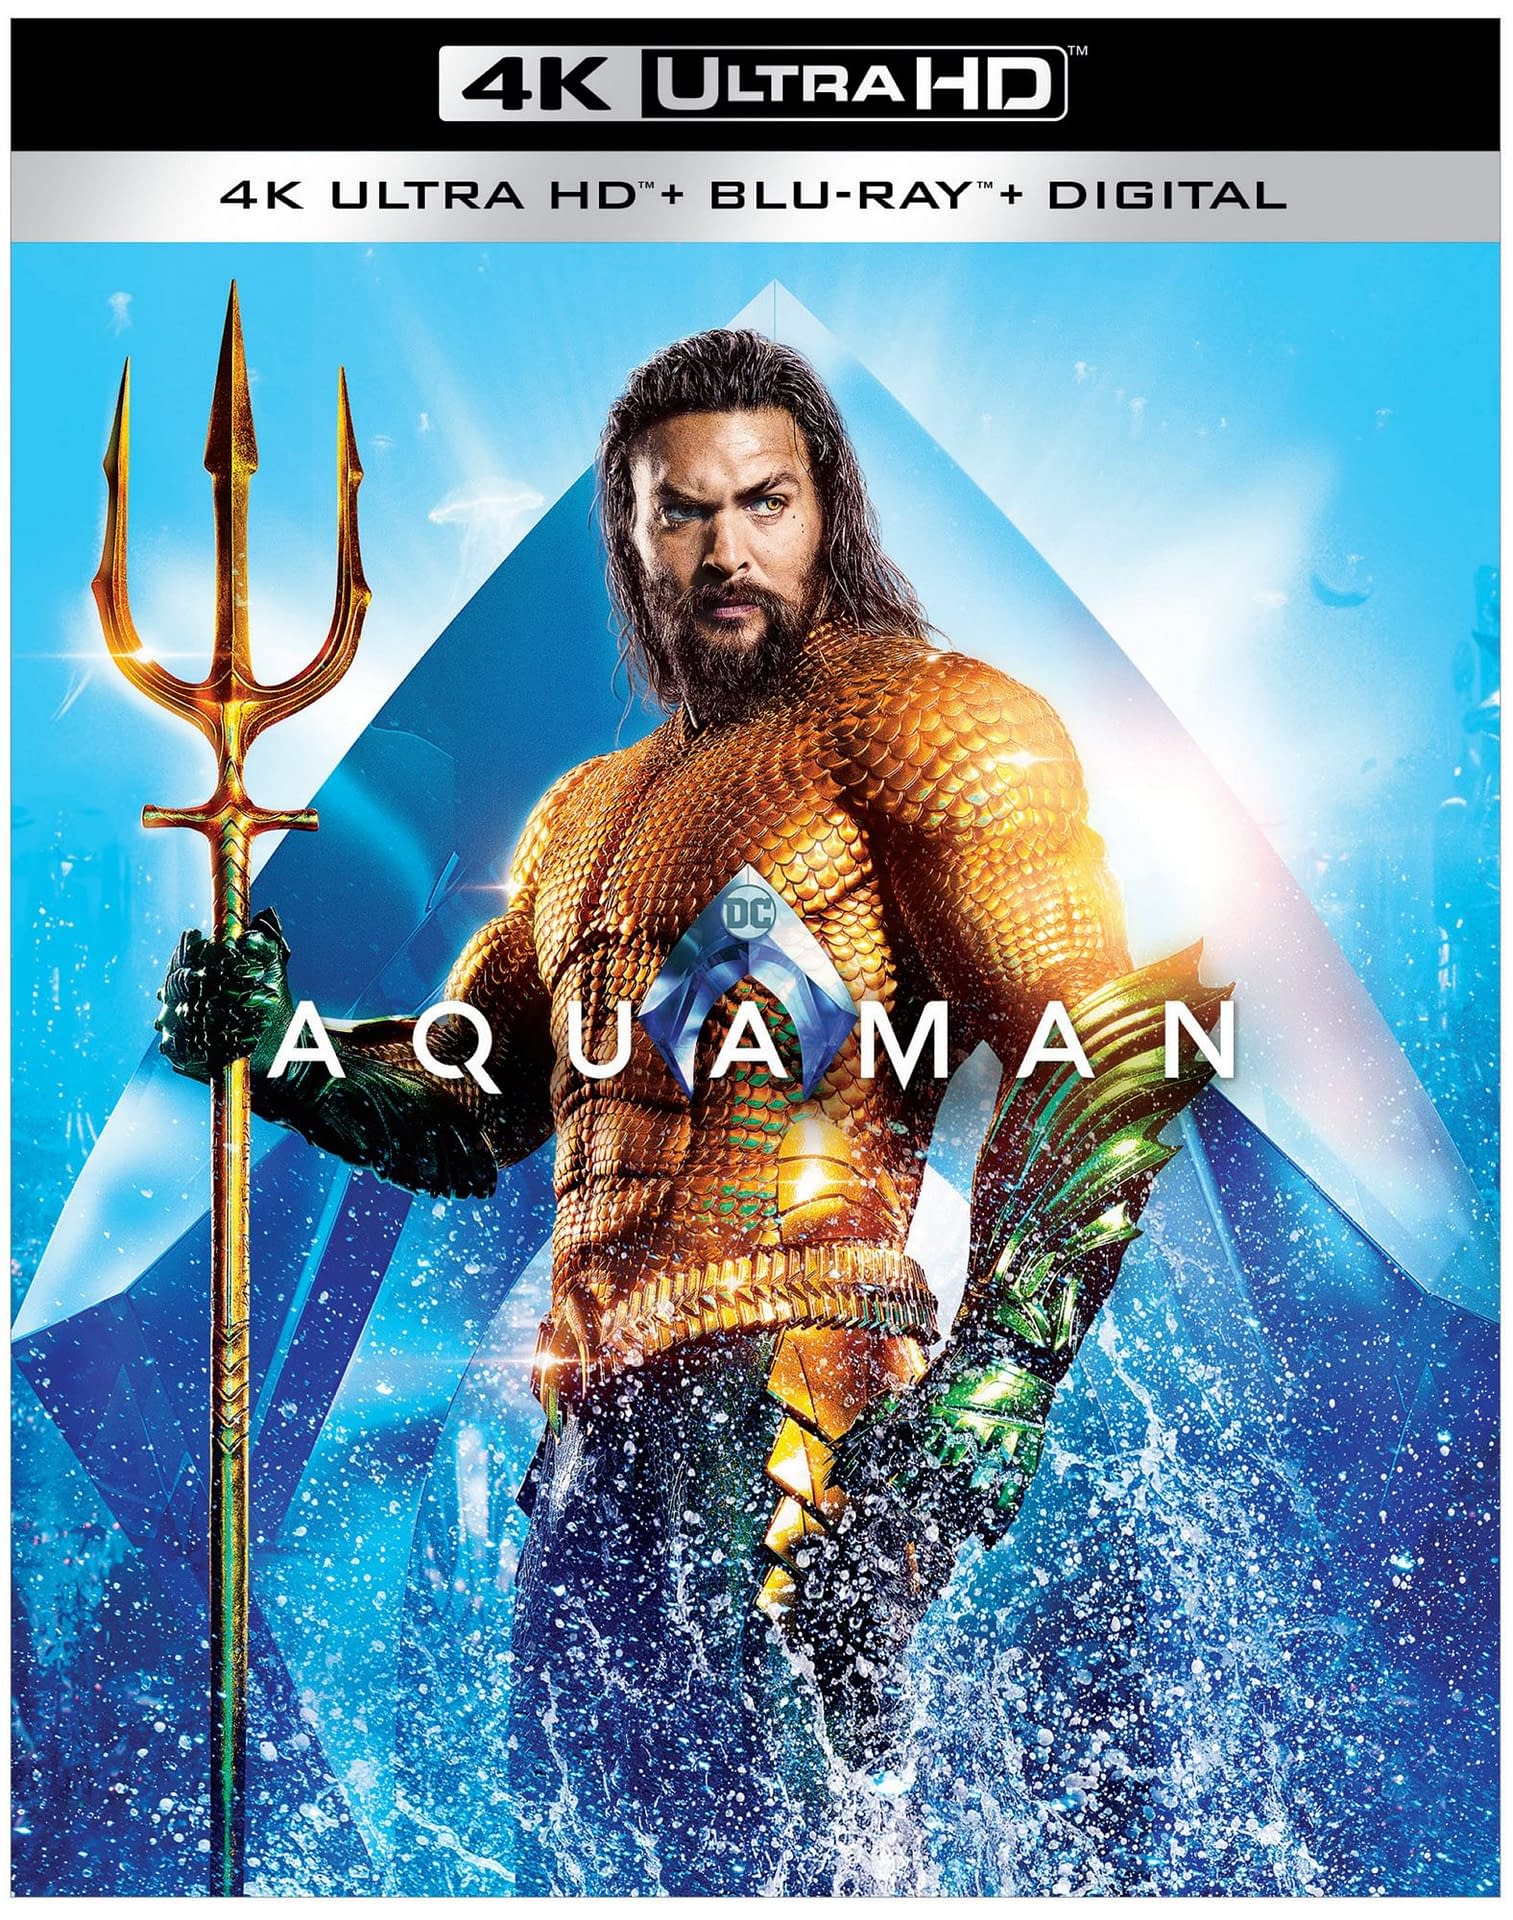 There Will Be No Director's Cut of Aquaman